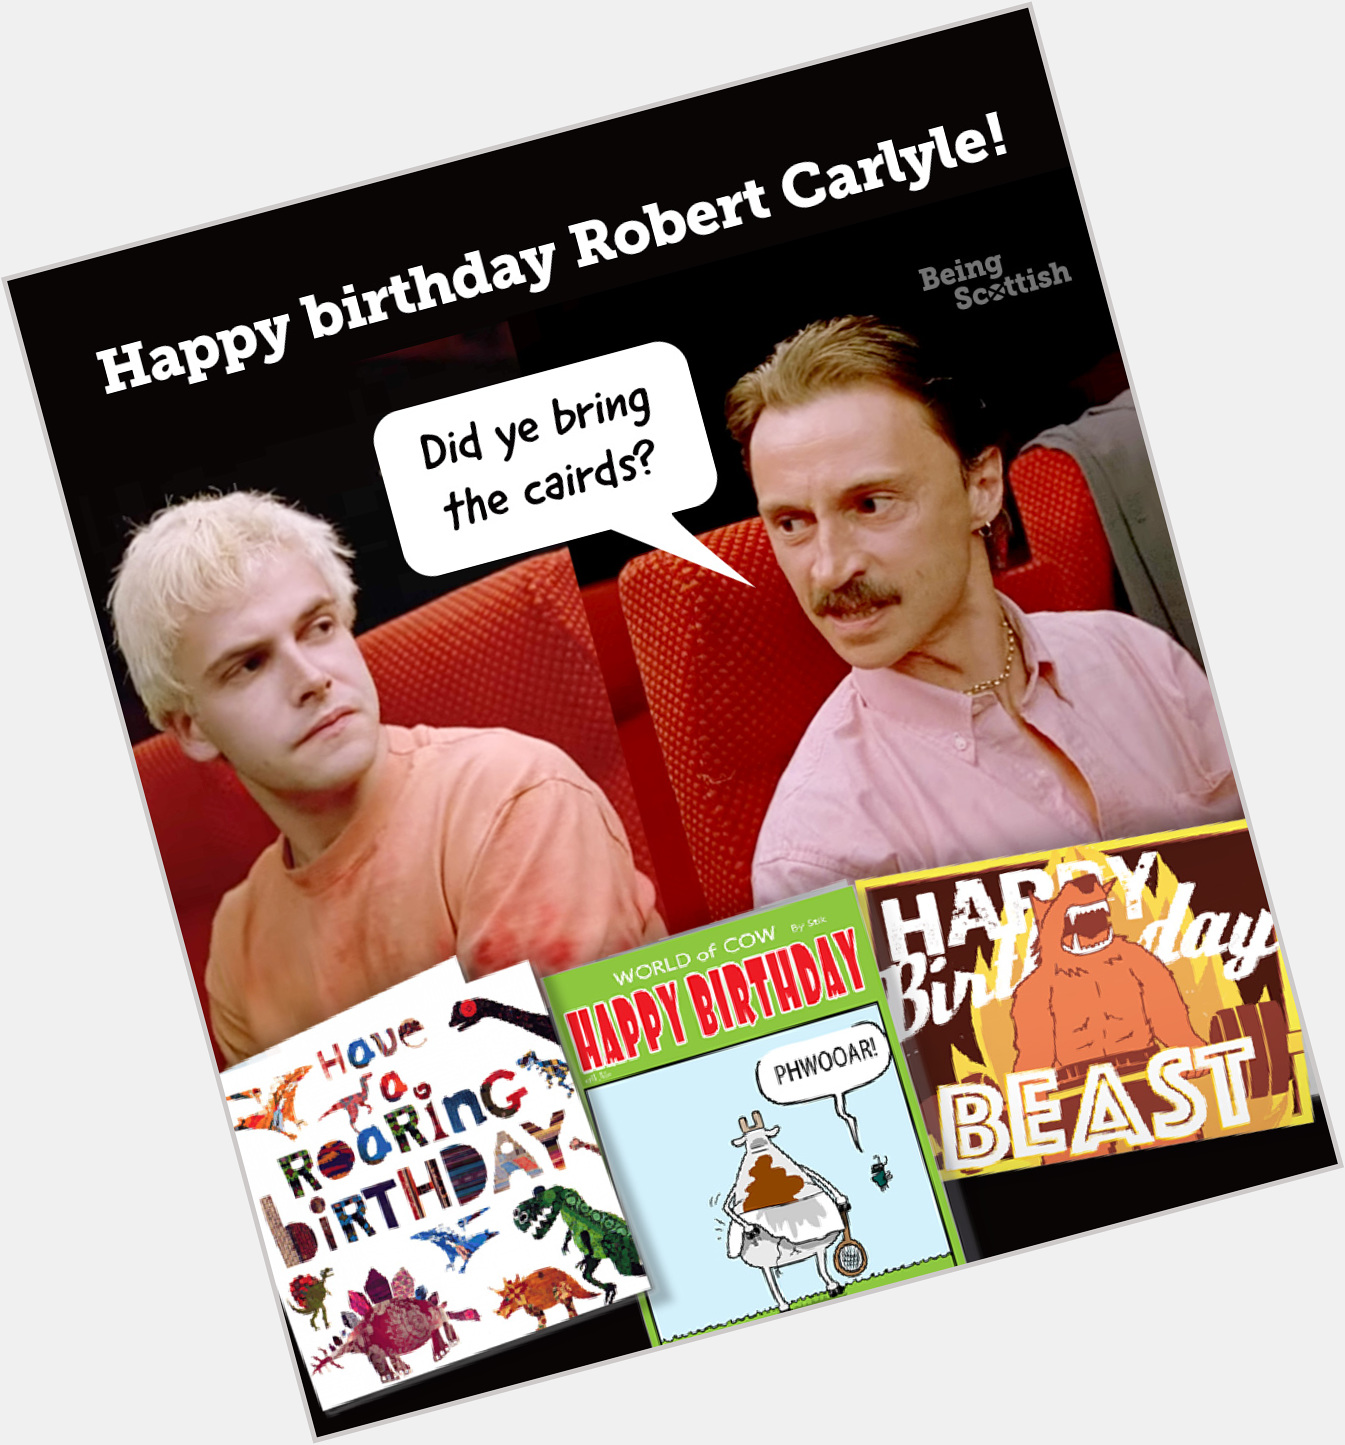 Happy birthday to Robert Carlyle who is 59 today. Dinnae worry, we brought the cairds! 